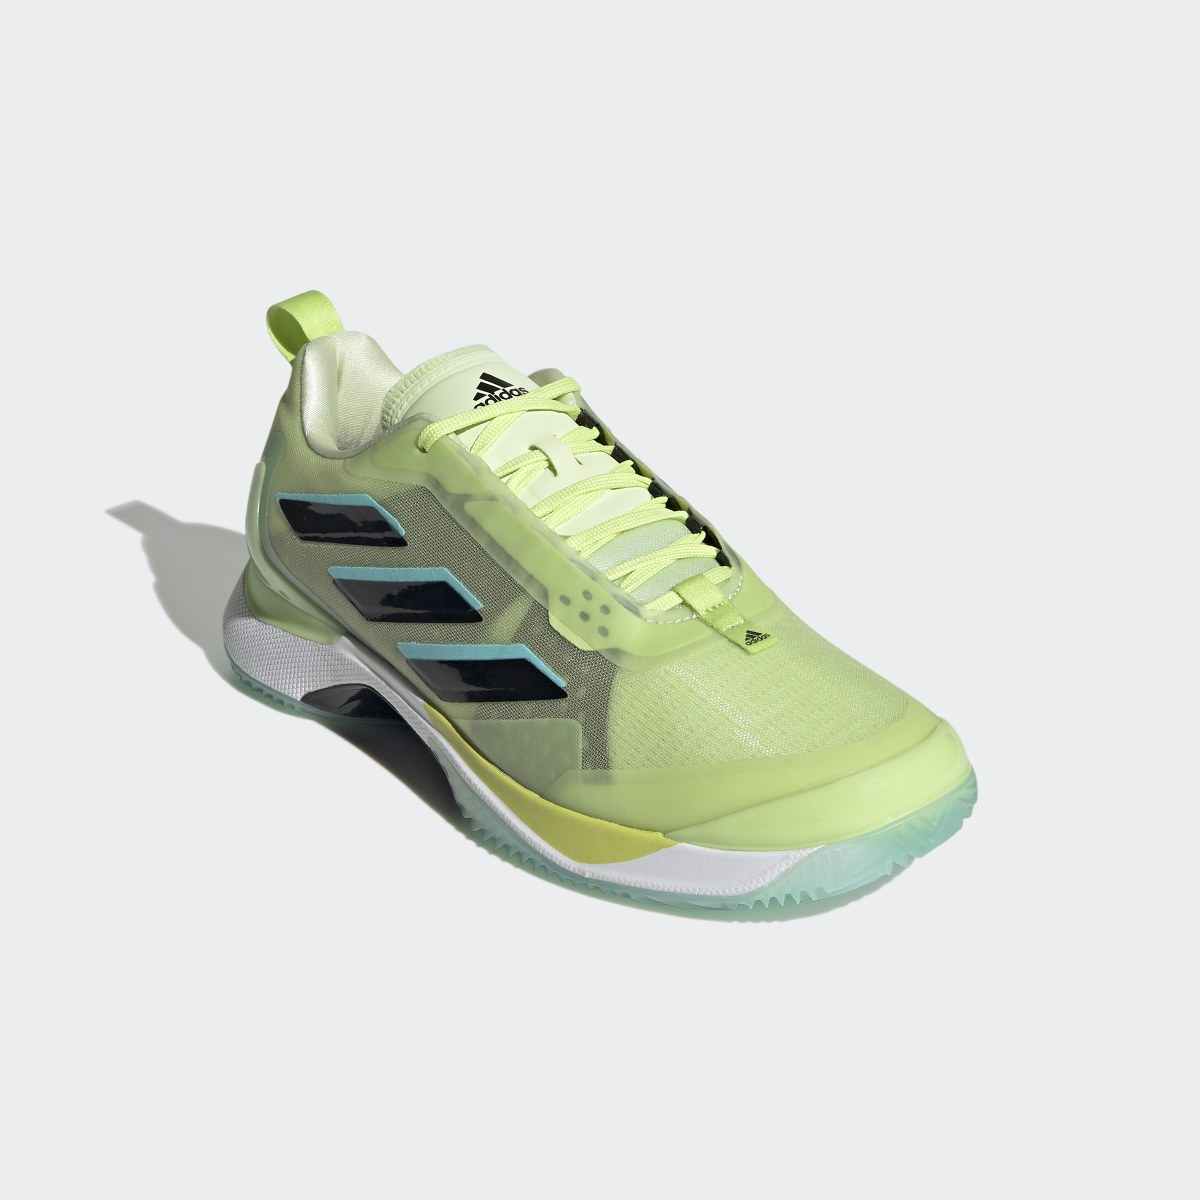 Adidas Avacourt Clay Court Tennis Shoes. 8